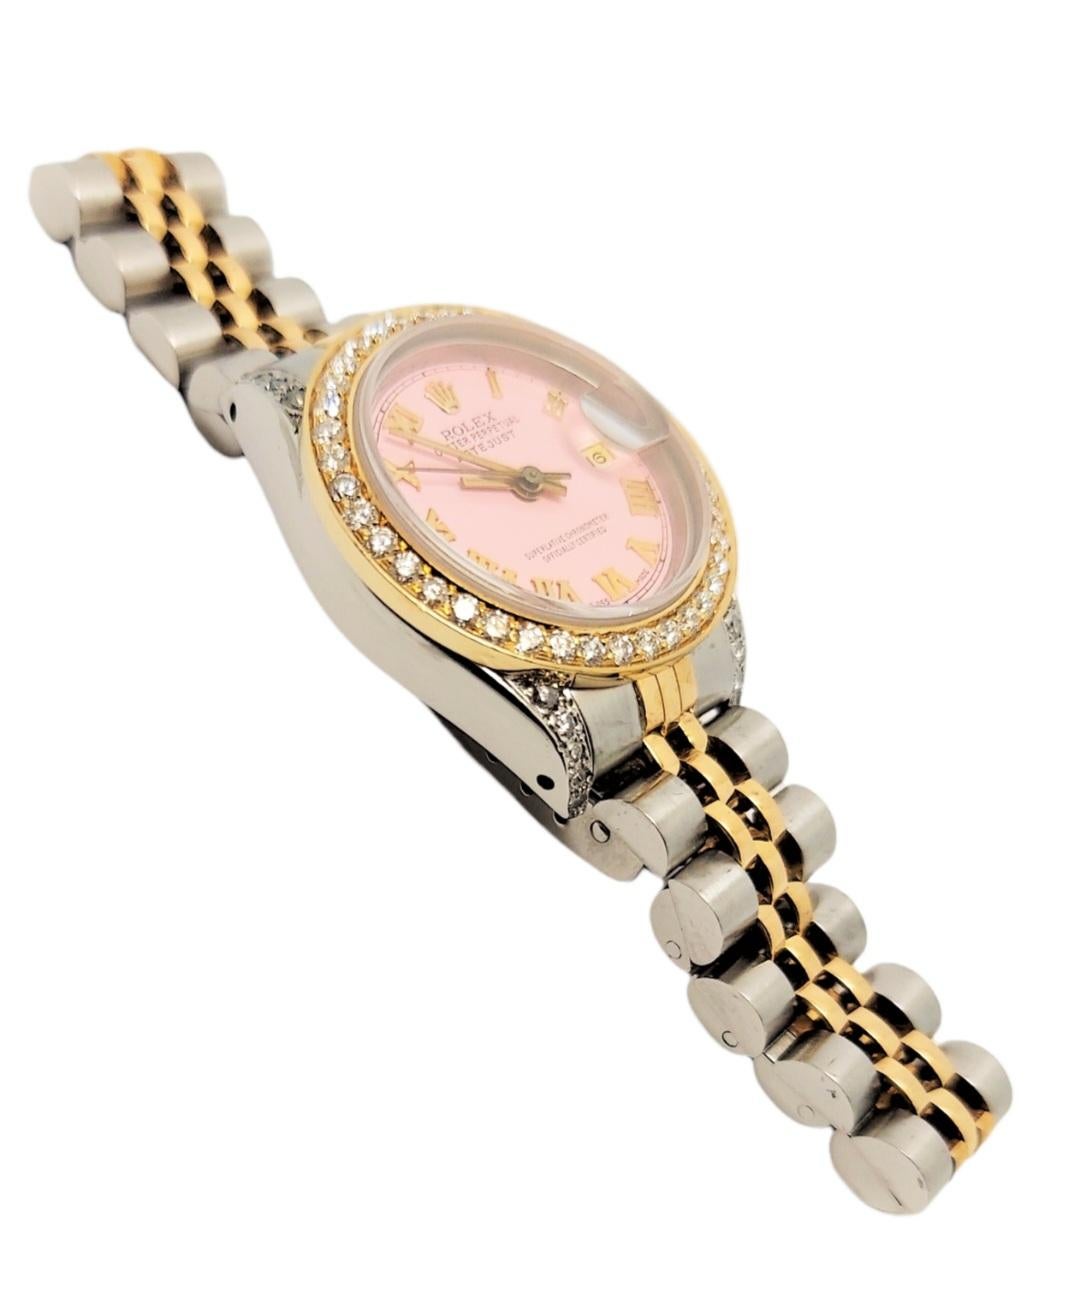 (WATCH DESCRIPTION)
Brand - Rolex
Style - Datejust
Model - 69173
Metals - Yellow gold/steel
Bezel - Custom Yellow gold Diamond
Dial - Custom Pink Roman numeral
Crystal - Sapphire
Movement - automatic CAL-2135
Band - Two Tone Jubilee

3 years